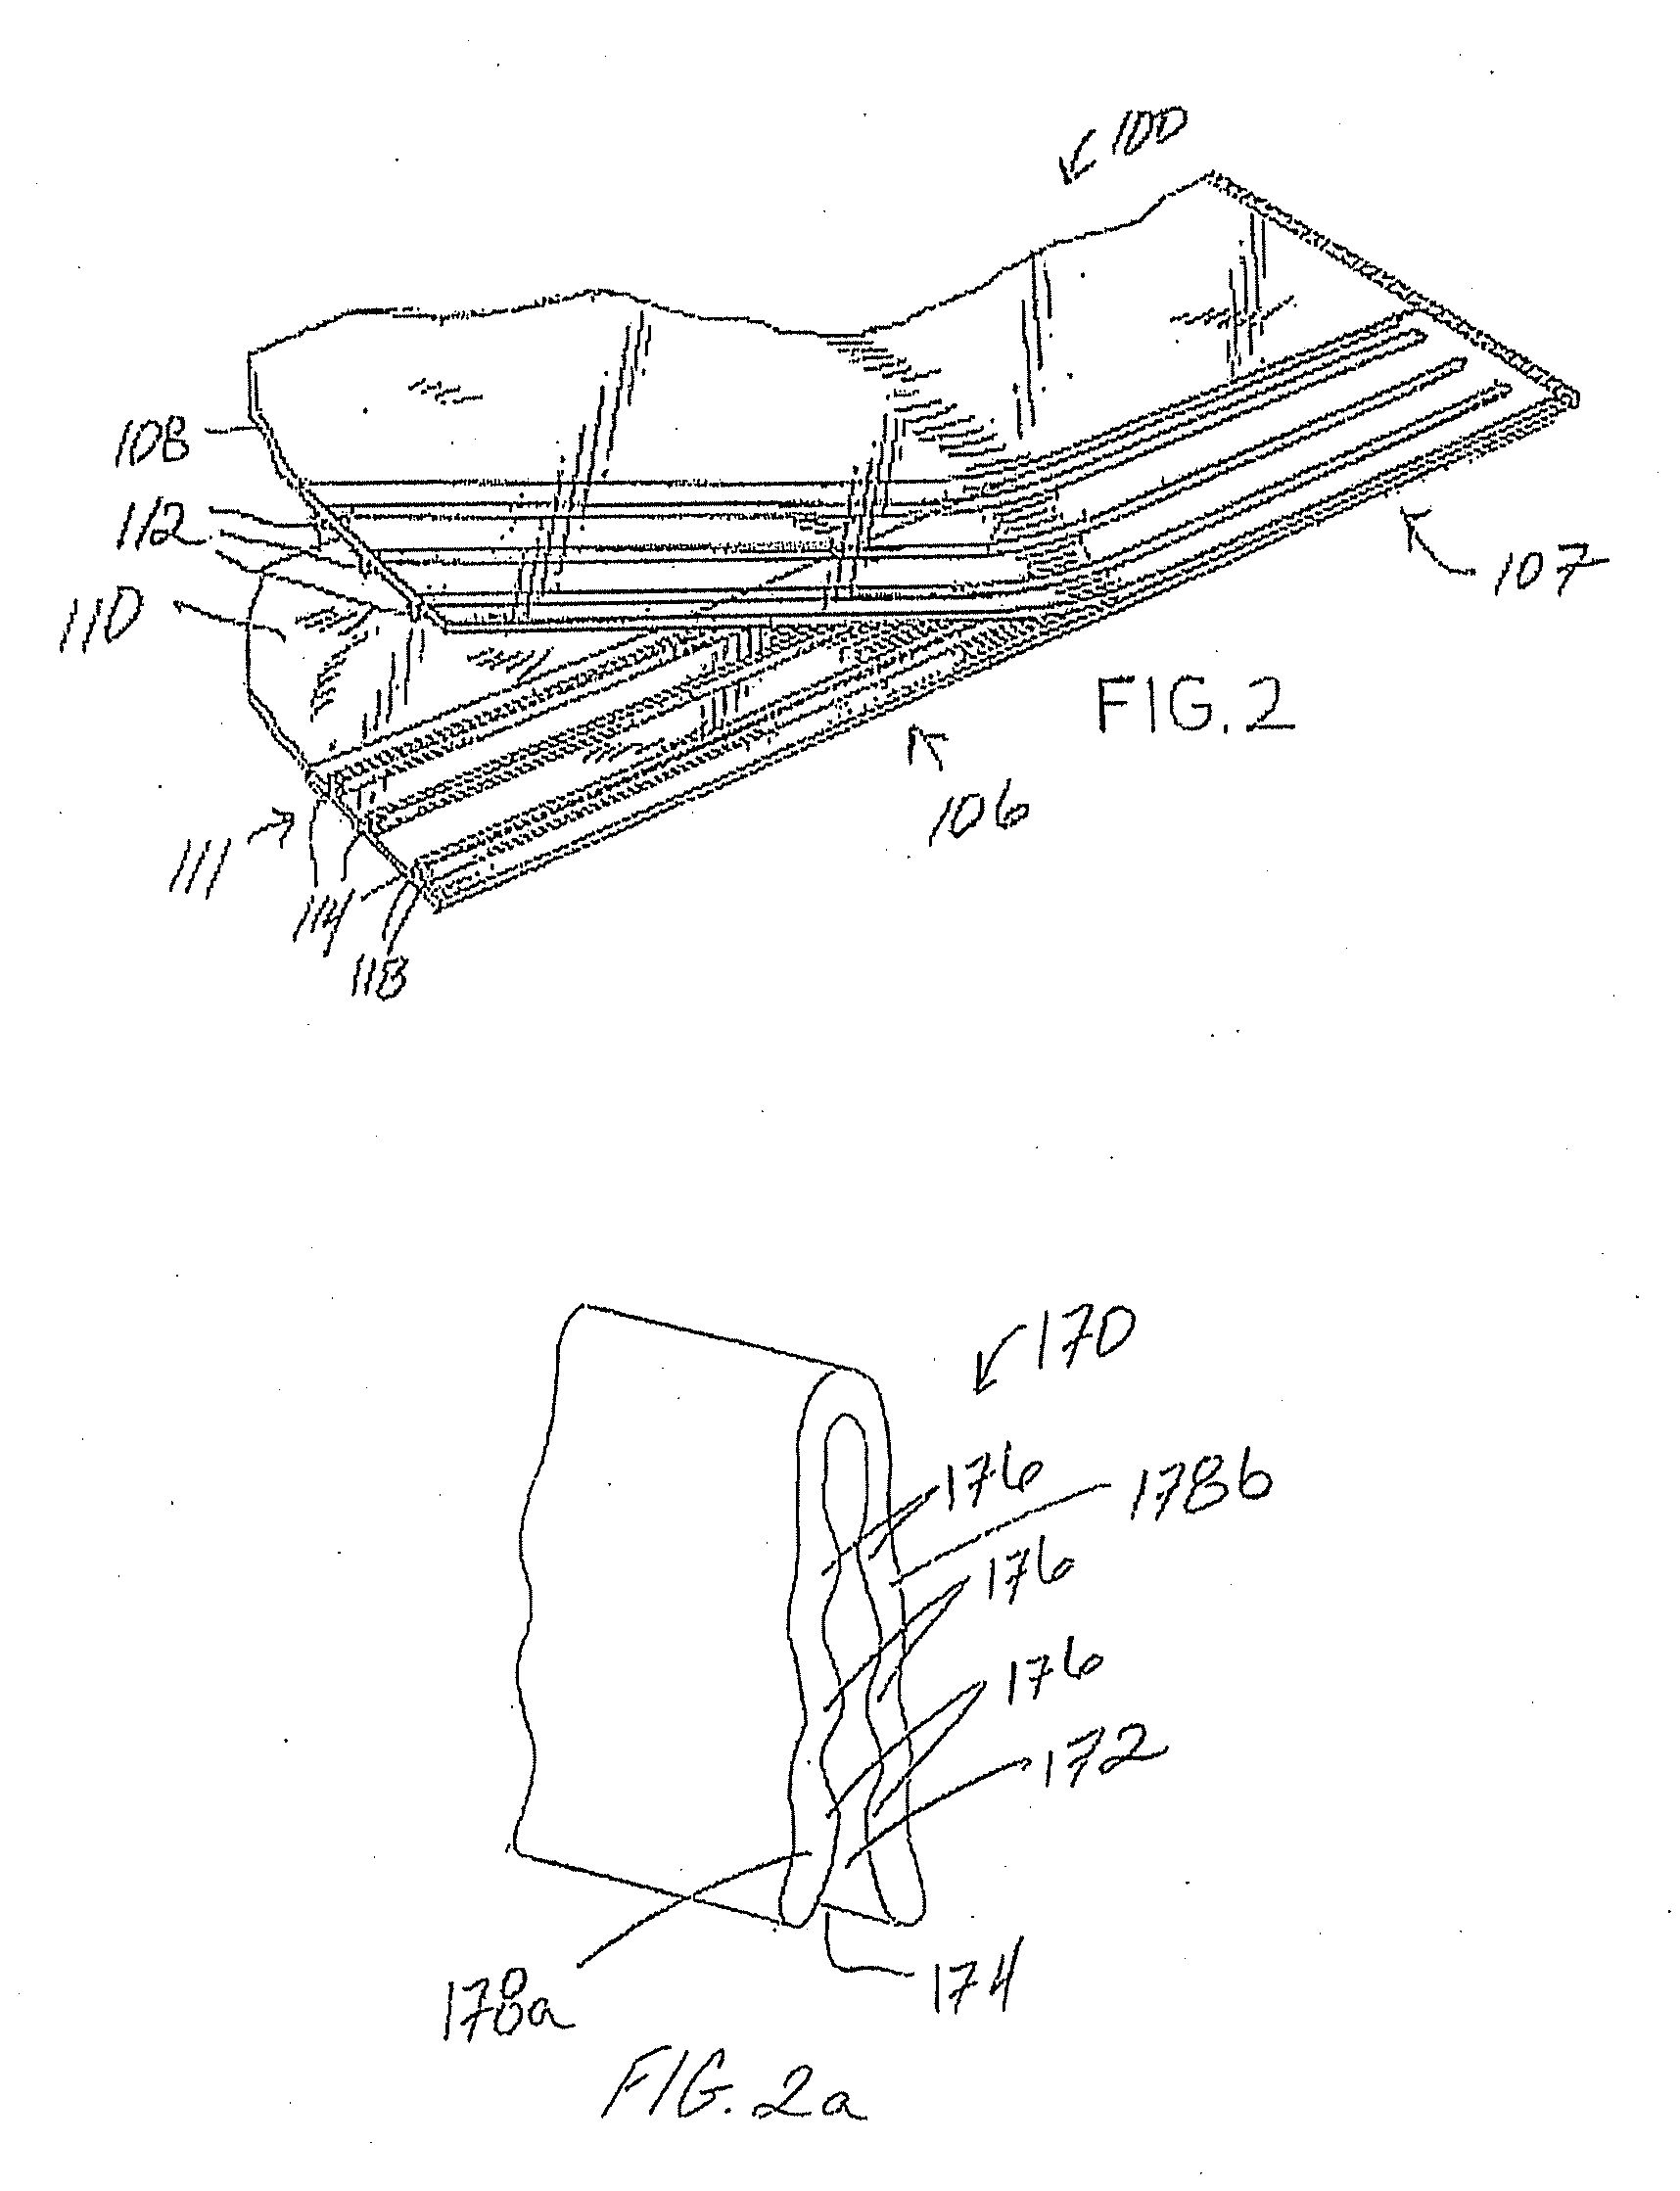 Inflatable portable treatment device